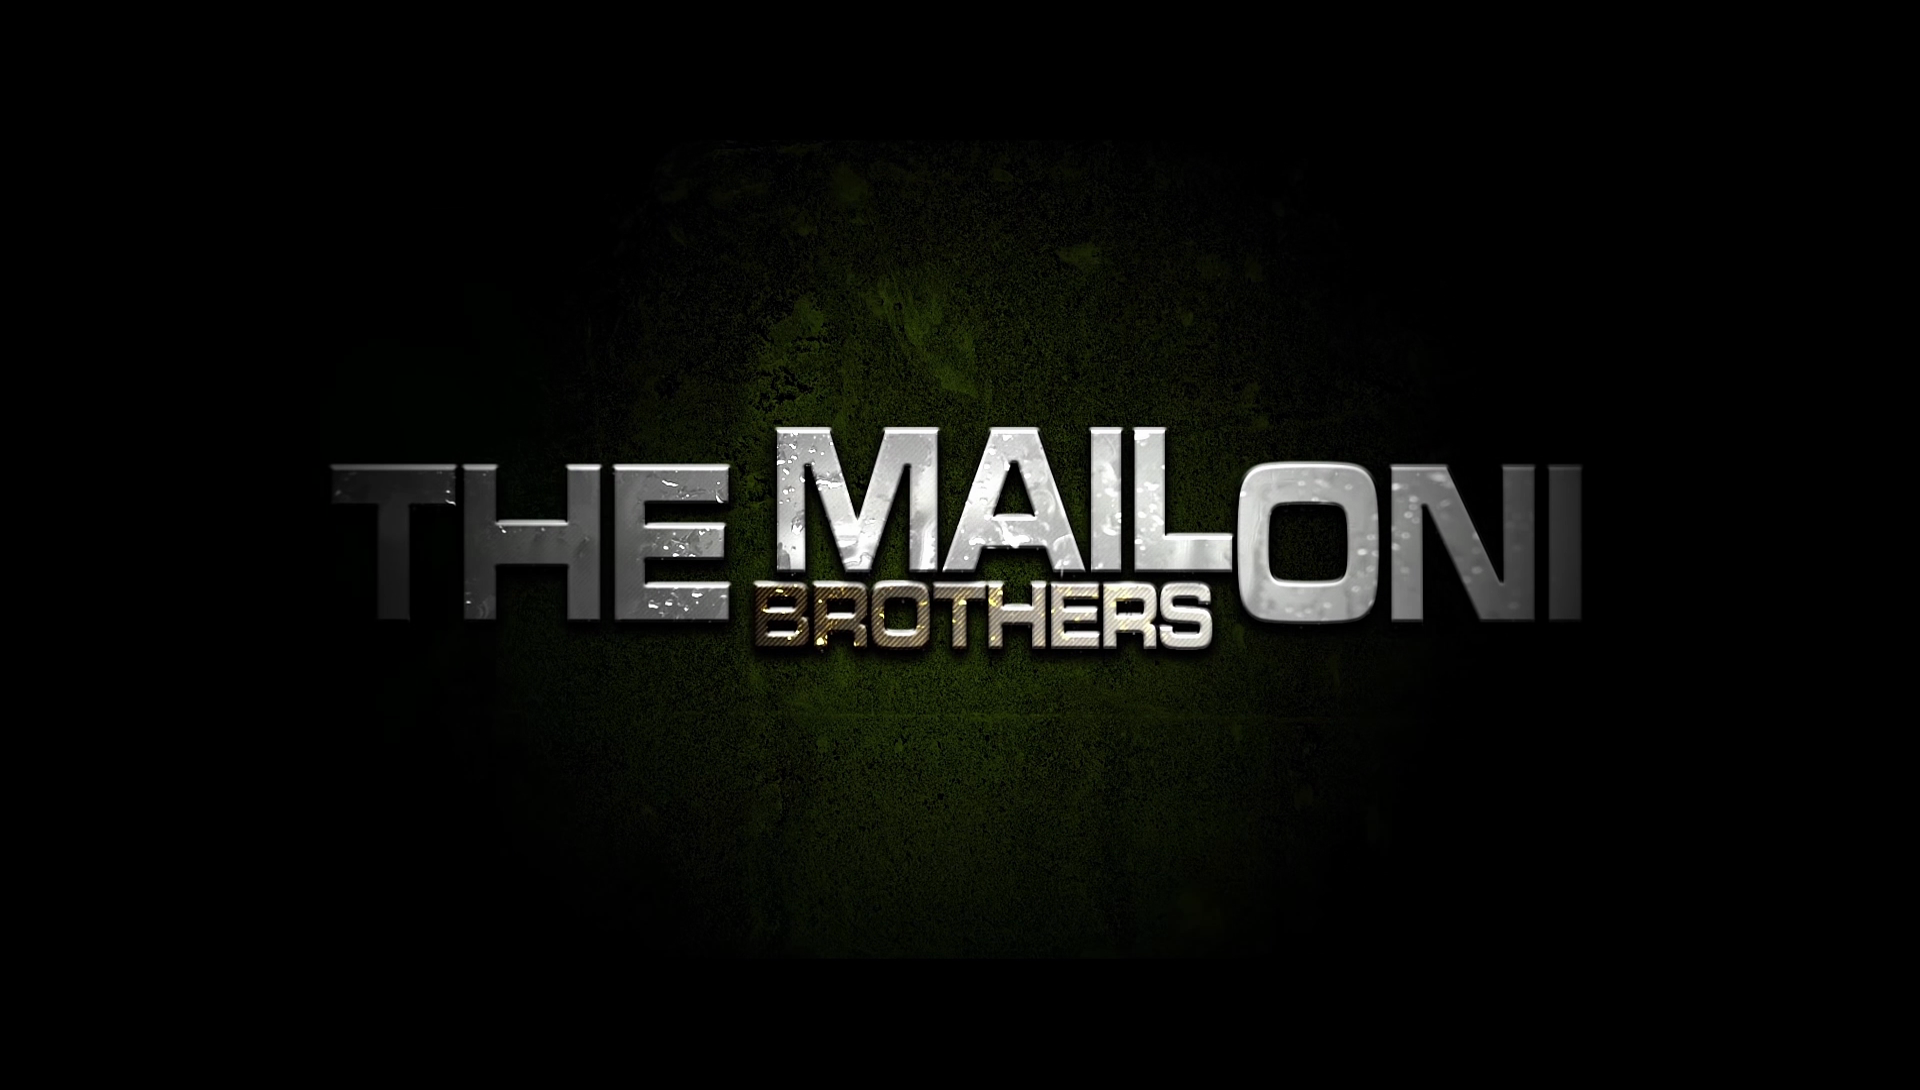 MOVIE TRAILER: The Mailoni Brother's